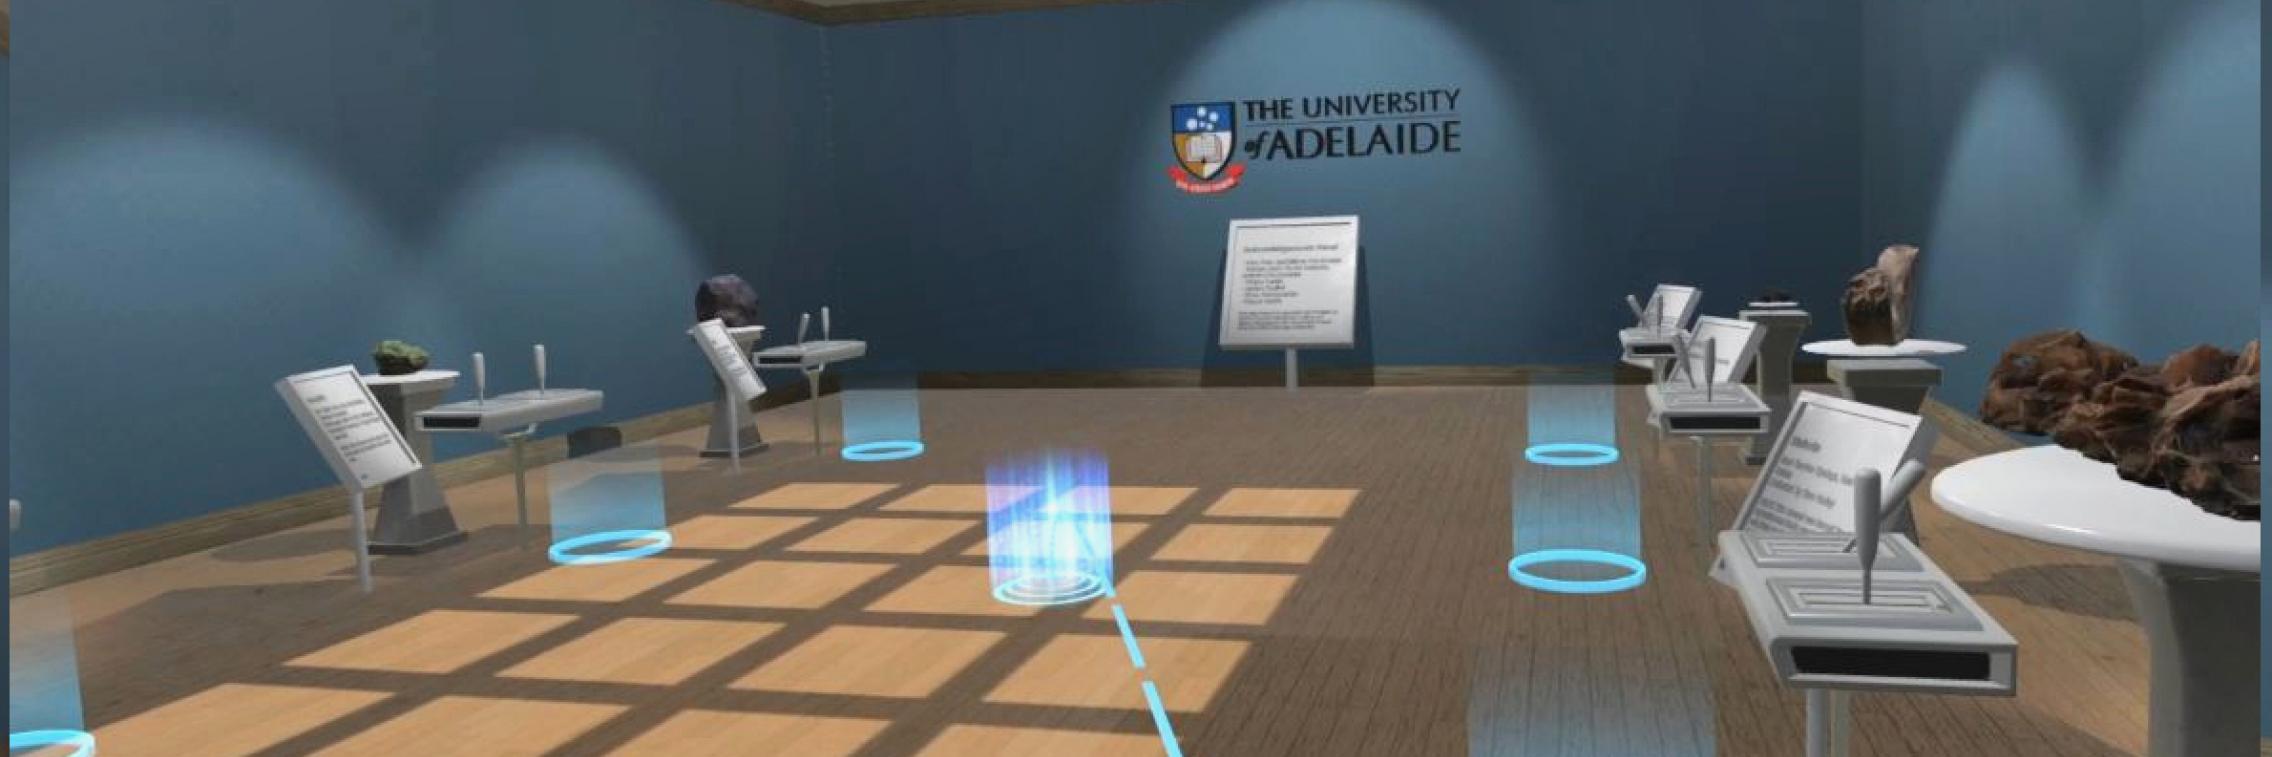 The University of Adelaide’s Tate Museum has unveiled a new virtual reality exhibition that can be enjoyed by anyone with a VR headset.